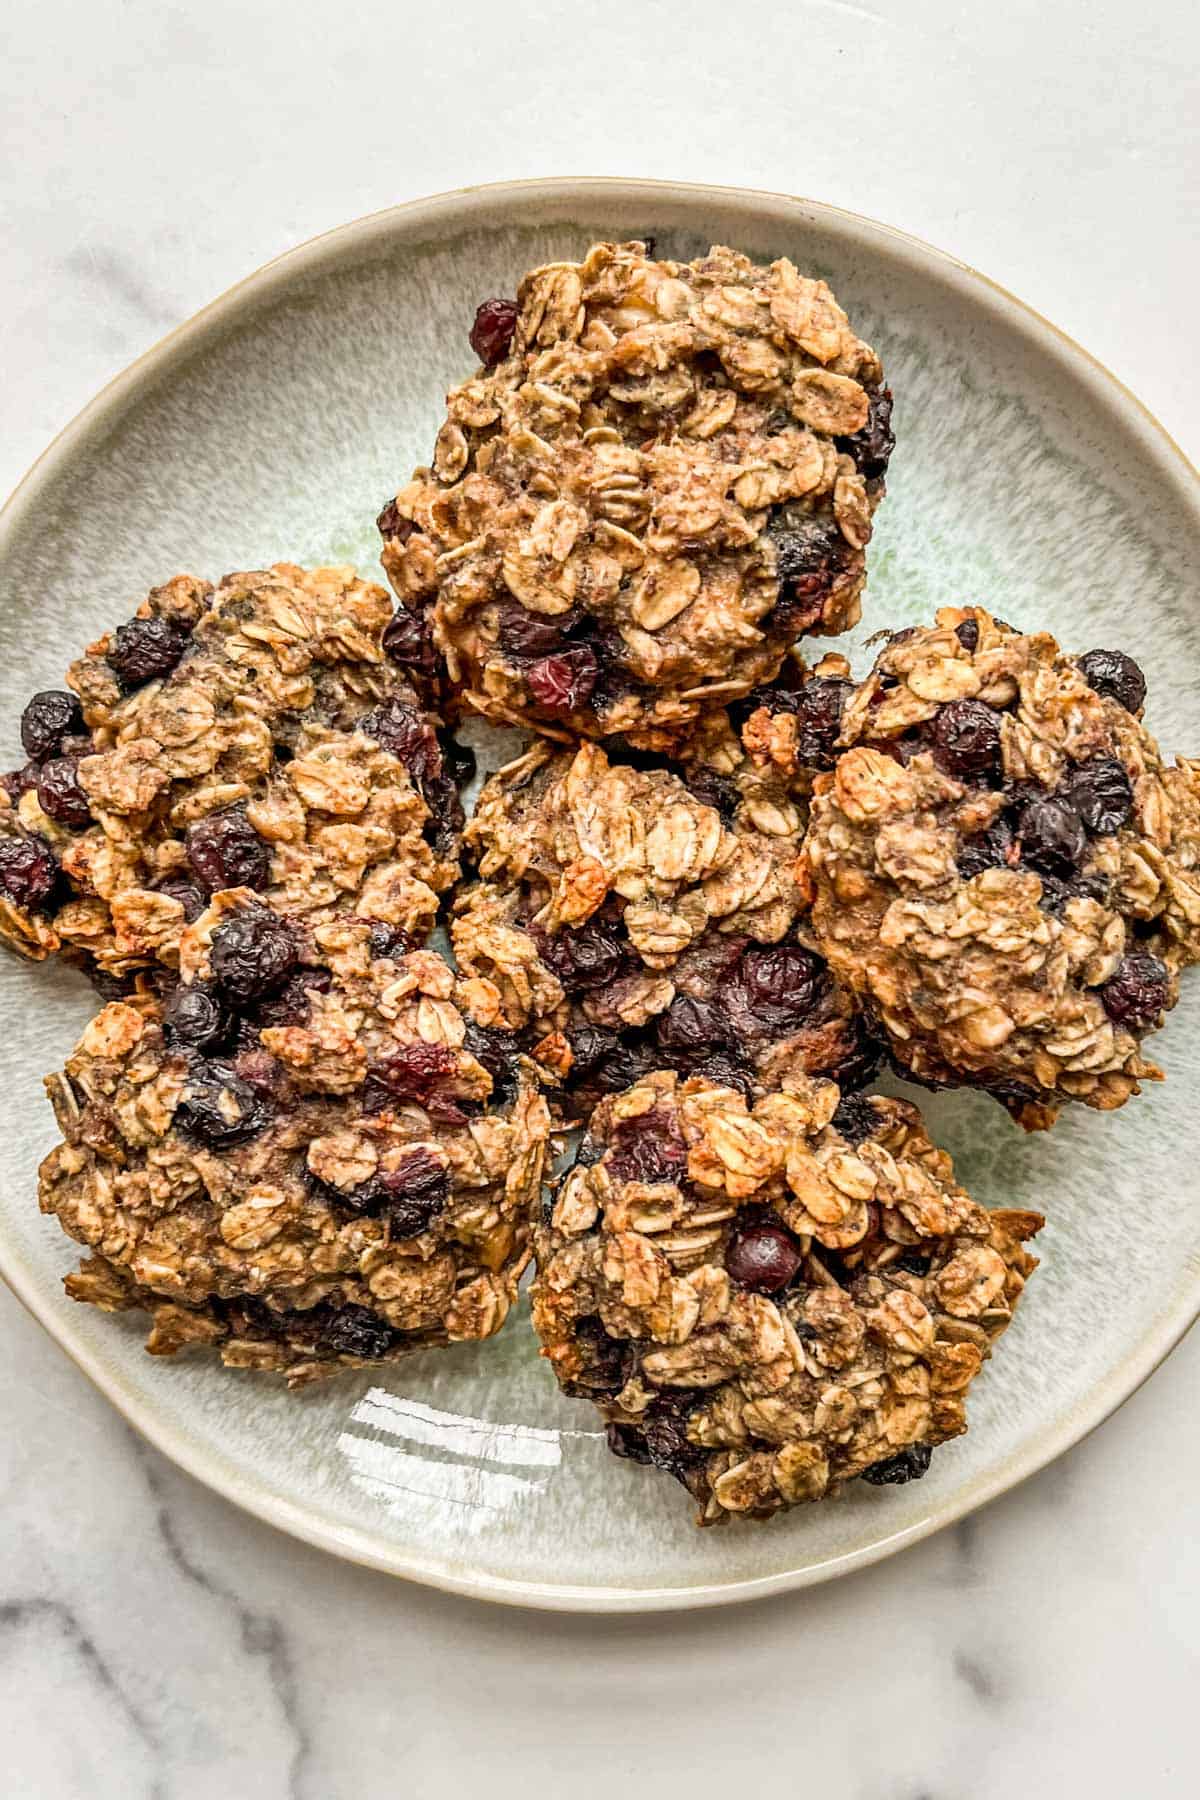 Blueberry breakfast cookies on a small green plate.